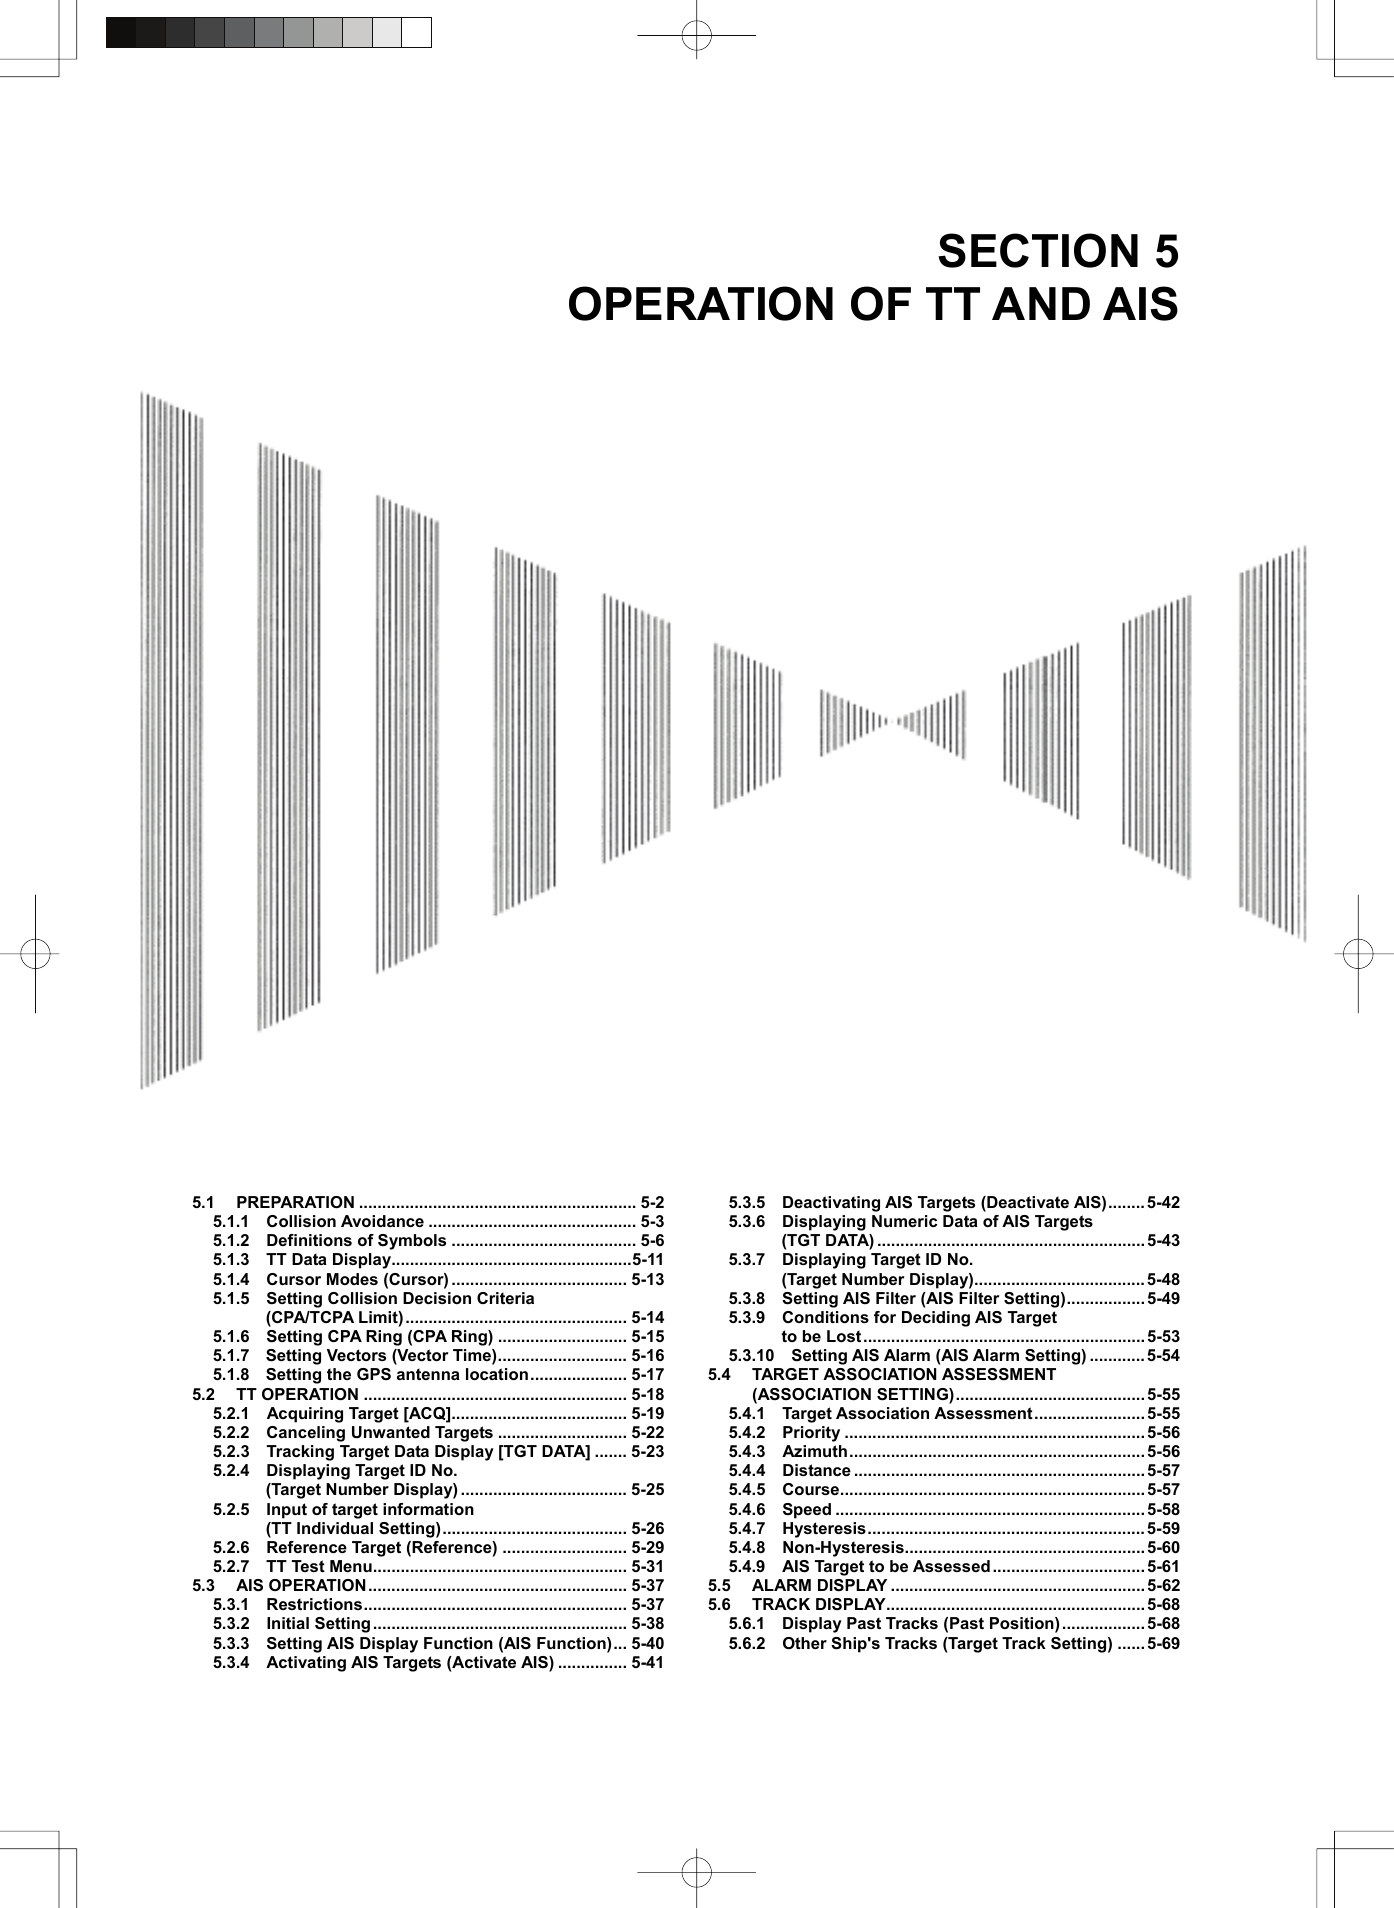  SECTION 5 OPERATION OF TT AND AIS       5.1 PREPARATION ............................................................ 5-2 5.1.1  Collision Avoidance ............................................. 5-3 5.1.2  Definitions of Symbols ........................................ 5-6 5.1.3  TT Data Display....................................................5-11 5.1.4  Cursor Modes (Cursor) ...................................... 5-13 5.1.5  Setting Collision Decision Criteria  (CPA/TCPA Limit) ................................................ 5-14 5.1.6    Setting CPA Ring (CPA Ring) ............................ 5-15 5.1.7  Setting Vectors (Vector Time)............................ 5-16 5.1.8  Setting the GPS antenna location..................... 5-17 5.2 TT OPERATION ......................................................... 5-18 5.2.1  Acquiring Target [ACQ]...................................... 5-19 5.2.2  Canceling Unwanted Targets ............................ 5-22 5.2.3    Tracking Target Data Display [TGT DATA] ....... 5-23 5.2.4  Displaying Target ID No.  (Target Number Display) .................................... 5-25 5.2.5  Input of target information  (TT Individual Setting)........................................ 5-26 5.2.6  Reference Target (Reference) ........................... 5-29 5.2.7  TT Test Menu....................................................... 5-31 5.3 AIS OPERATION........................................................ 5-37 5.3.1  Restrictions......................................................... 5-37 5.3.2  Initial Setting ....................................................... 5-38 5.3.3    Setting AIS Display Function (AIS Function)... 5-40 5.3.4    Activating AIS Targets (Activate AIS) ............... 5-41 5.3.5  Deactivating AIS Targets (Deactivate AIS)........5-42 5.3.6  Displaying Numeric Data of AIS Targets  (TGT DATA) .......................................................... 5-43 5.3.7  Displaying Target ID No.  (Target Number Display)..................................... 5-48 5.3.8    Setting AIS Filter (AIS Filter Setting)................. 5-49 5.3.9  Conditions for Deciding AIS Target  to be Lost ............................................................. 5-53 5.3.10  Setting AIS Alarm (AIS Alarm Setting) ............ 5-54 5.4 TARGET ASSOCIATION ASSESSMENT (ASSOCIATION SETTING)......................................... 5-55 5.4.1  Target Association Assessment........................5-55 5.4.2  Priority .................................................................5-56 5.4.3  Azimuth................................................................5-56 5.4.4  Distance ............................................................... 5-57 5.4.5  Course.................................................................. 5-57 5.4.6  Speed ...................................................................5-58 5.4.7  Hysteresis............................................................ 5-59 5.4.8  Non-Hysteresis.................................................... 5-60 5.4.9    AIS Target to be Assessed ................................. 5-61 5.5 ALARM DISPLAY ....................................................... 5-62 5.6 TRACK DISPLAY........................................................ 5-68 5.6.1  Display Past Tracks (Past Position)..................5-68 5.6.2    Other Ship&apos;s Tracks (Target Track Setting) ......5-69  